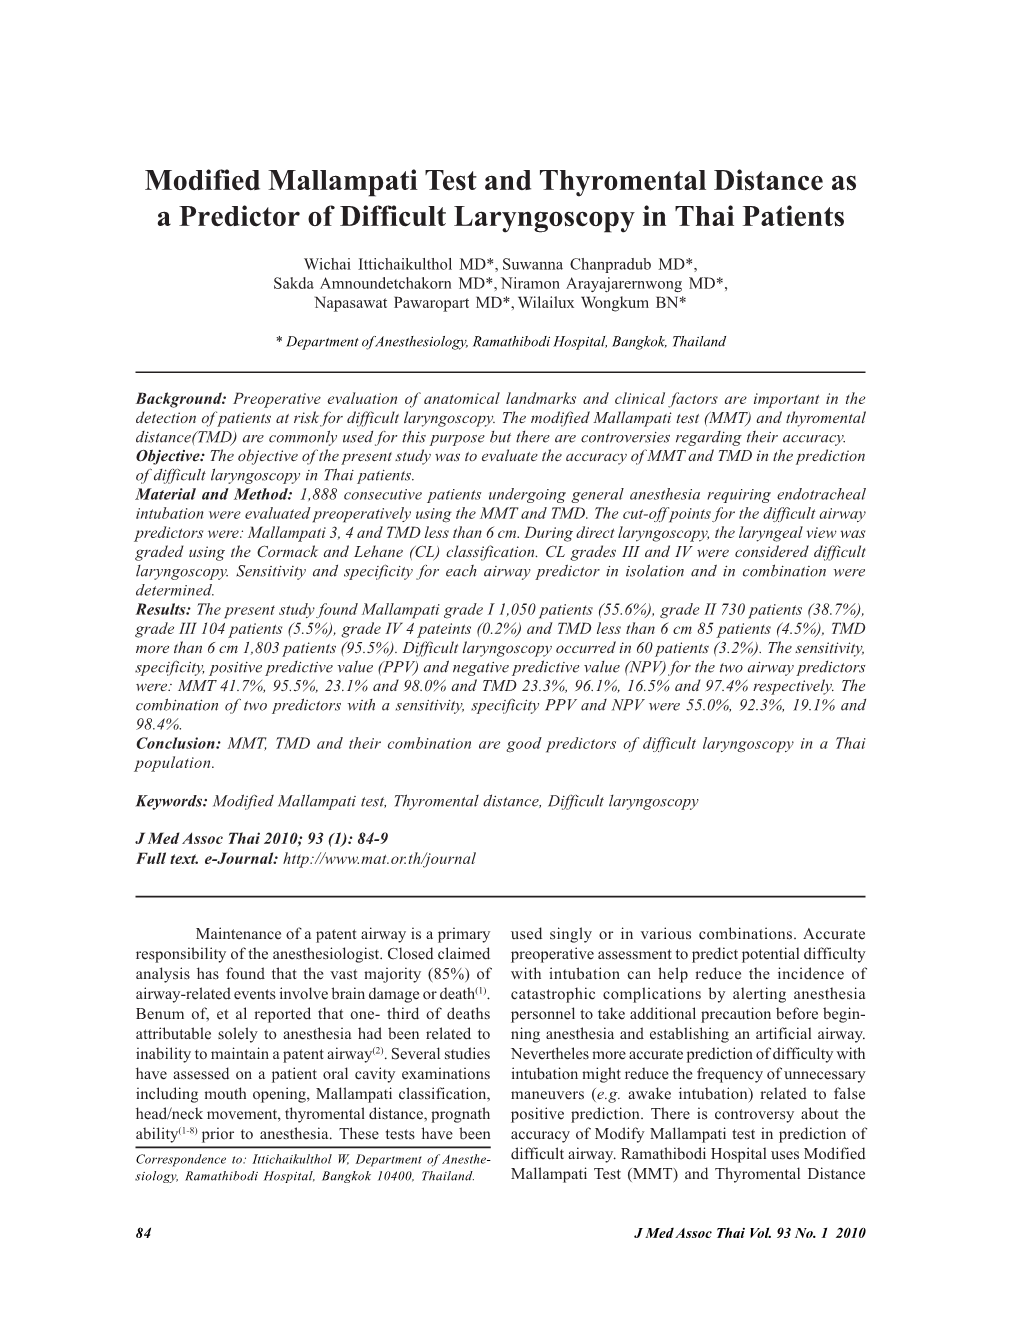 Modified Mallampati Test and Thyromental Distance As a Predictor of Difficult Laryngoscopy in Thai Patients